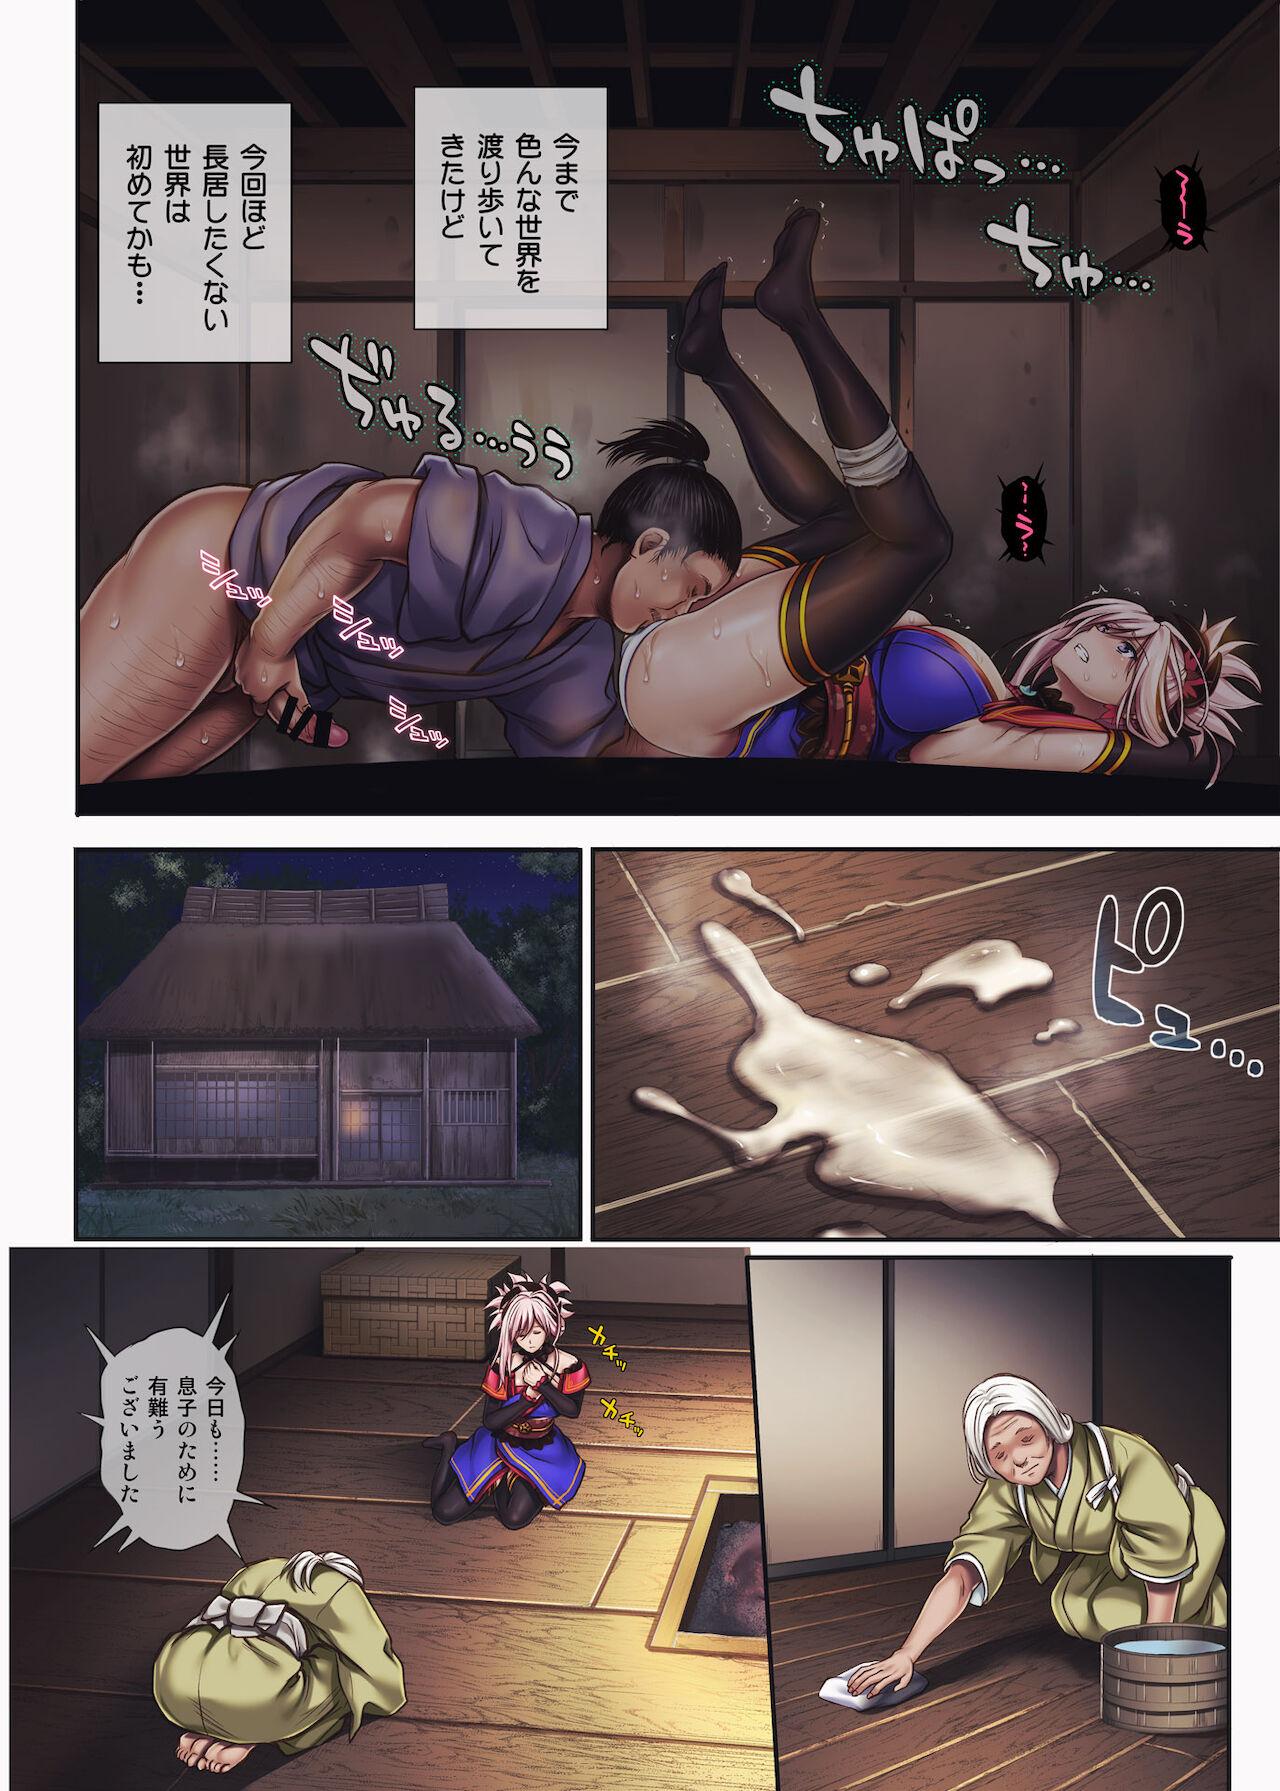 Gay Cyclone no Doujinshi Full Color Pack 4 - Fate grand order Boy - Page 5